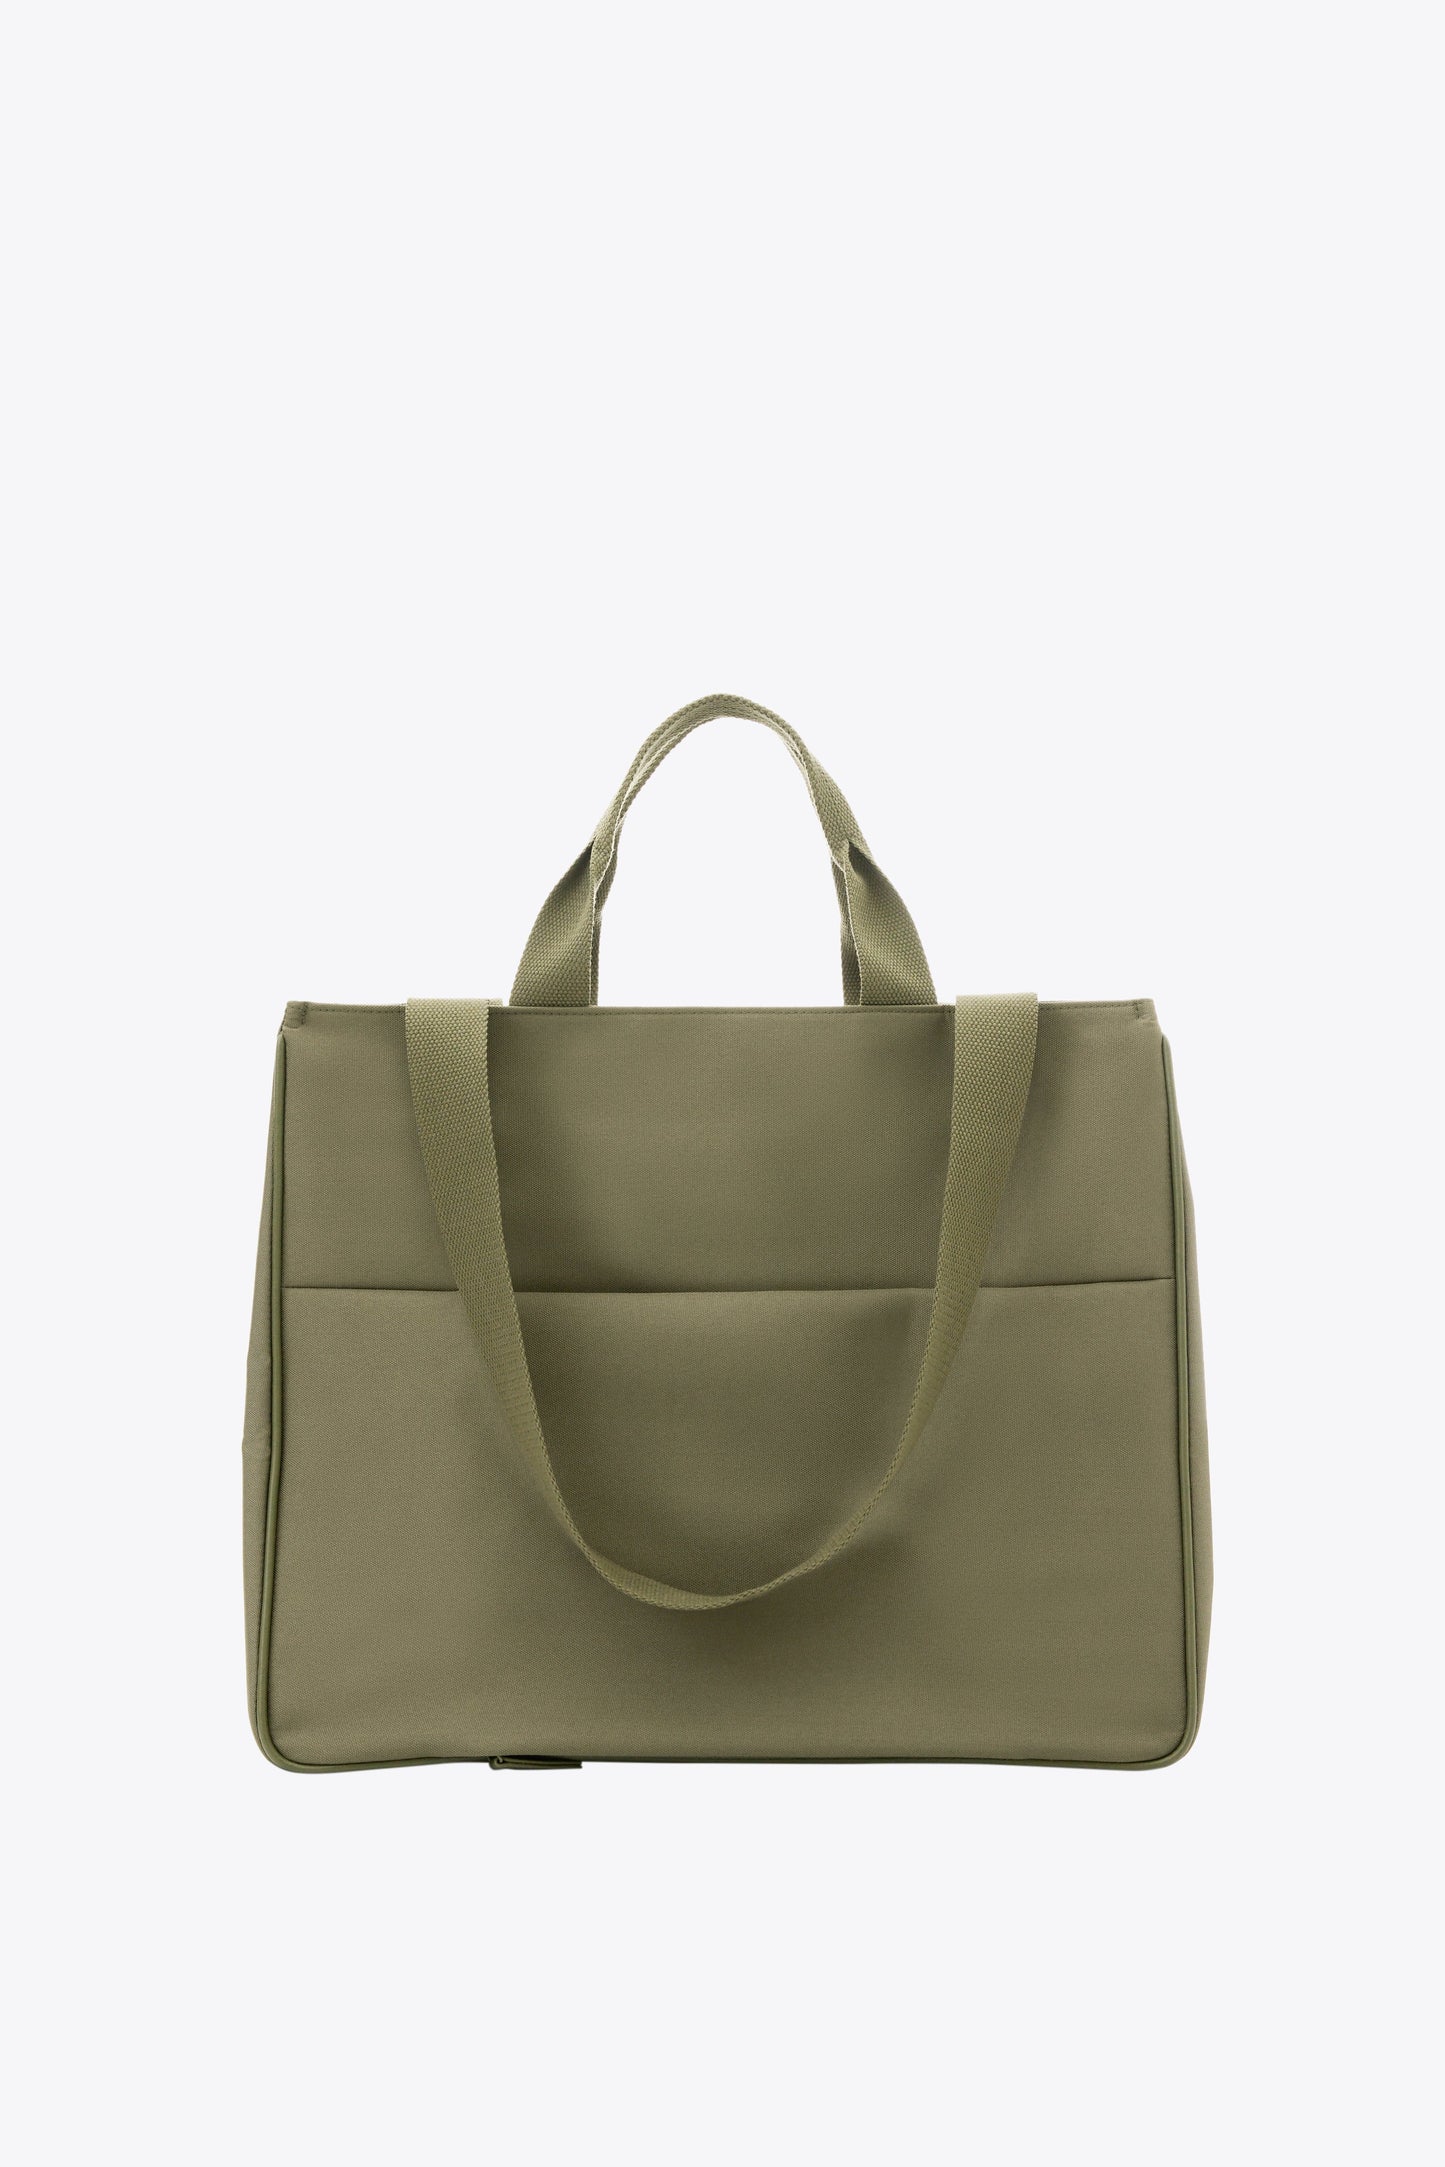 The East To West Tote in Olive